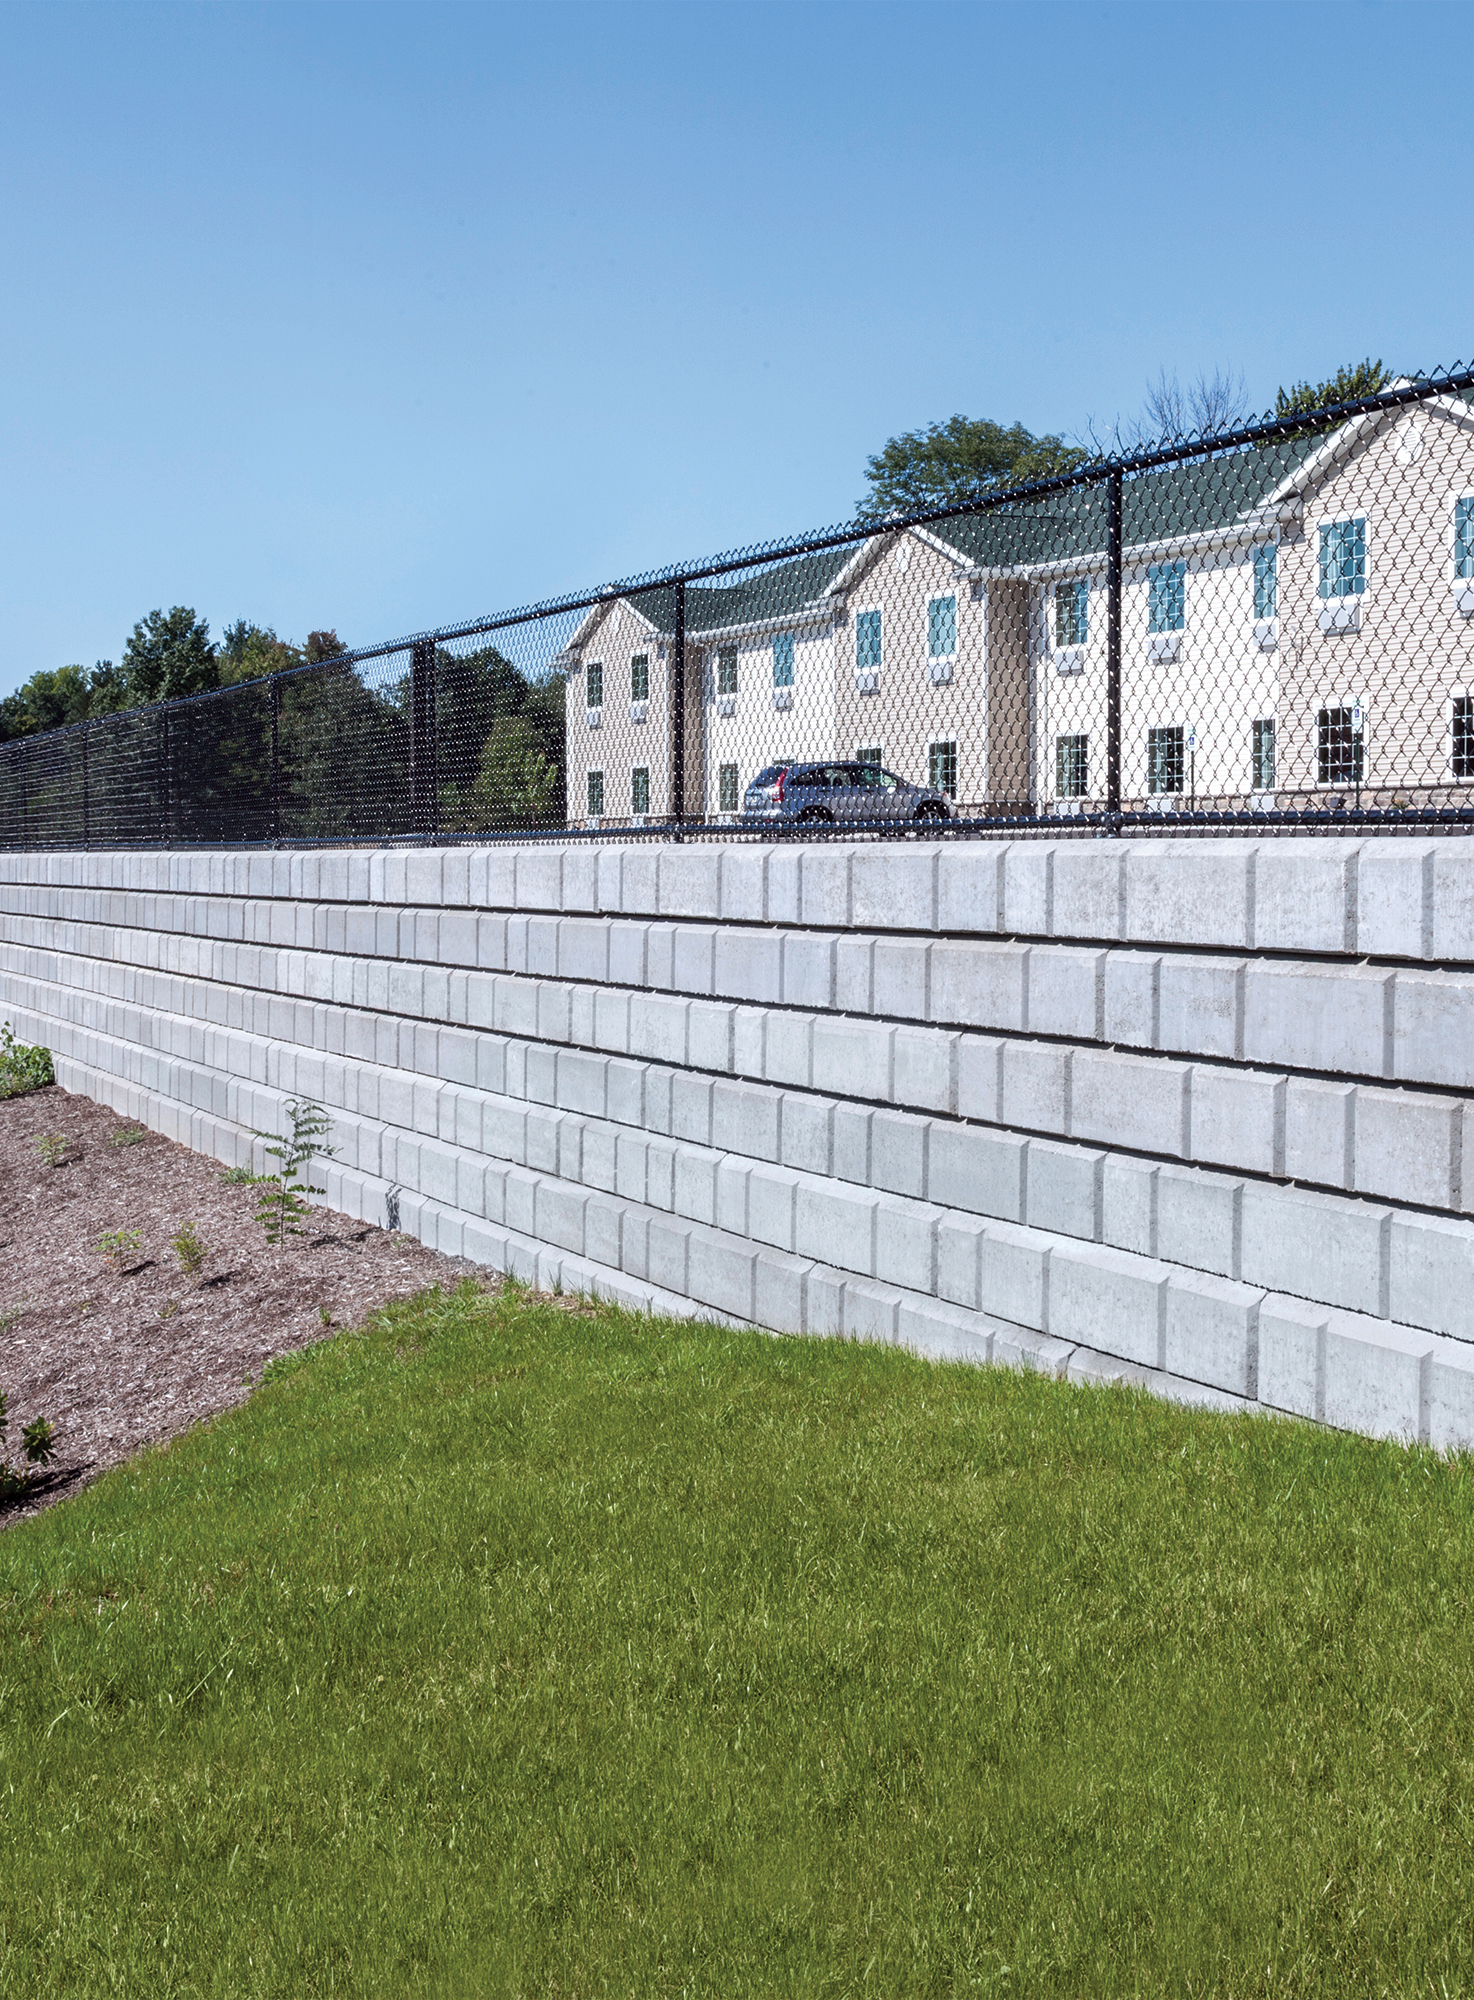 A chain-link fence lines the top of the Dura-Hold retaining wall, defining the upper parking area from the lower garden island.